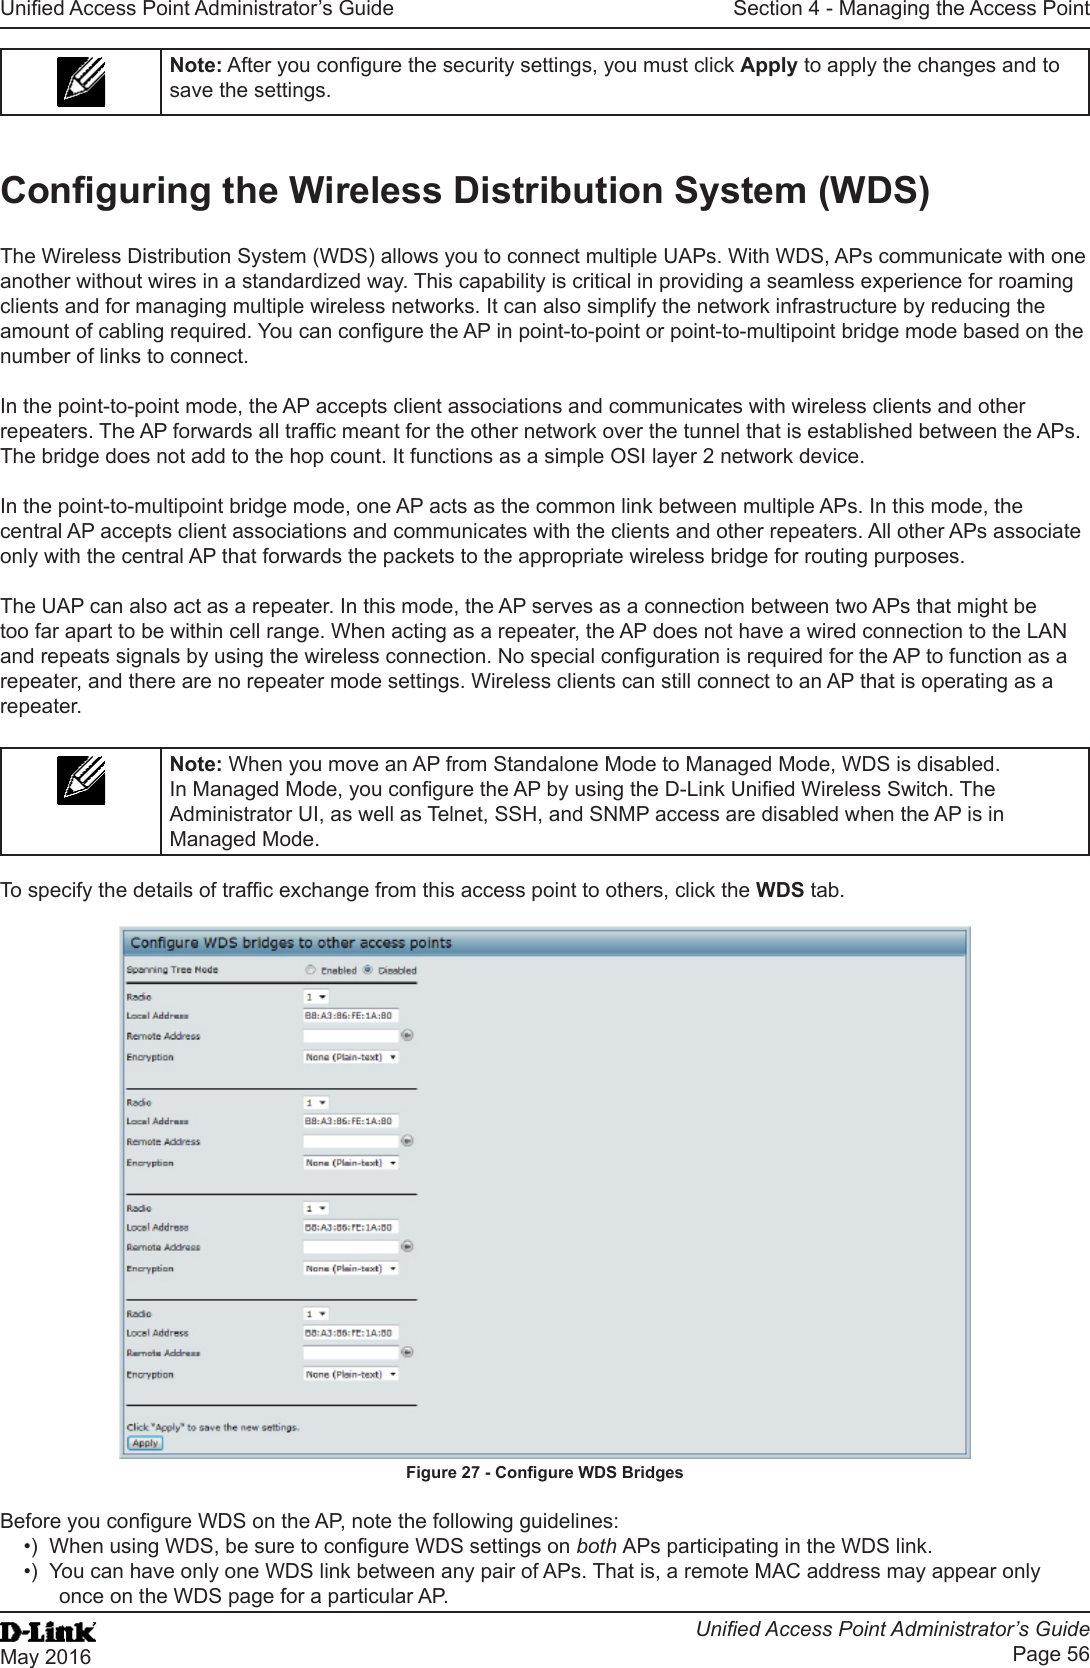 Unied Access Point Administrator’s GuideUnied Access Point Administrator’s GuidePage 56May 2016Section 4 - Managing the Access PointNote: After you congure the security settings, you must click Apply to apply the changes and to save the settings.Conguring the Wireless Distribution System (WDS)The Wireless Distribution System (WDS) allows you to connect multiple UAPs. With WDS, APs communicate with one another without wires in a standardized way. This capability is critical in providing a seamless experience for roaming clients and for managing multiple wireless networks. It can also simplify the network infrastructure by reducing the amount of cabling required. You can congure the AP in point-to-point or point-to-multipoint bridge mode based on the number of links to connect.In the point-to-point mode, the AP accepts client associations and communicates with wireless clients and other repeaters. The AP forwards all trafc meant for the other network over the tunnel that is established between the APs. The bridge does not add to the hop count. It functions as a simple OSI layer 2 network device.In the point-to-multipoint bridge mode, one AP acts as the common link between multiple APs. In this mode, the central AP accepts client associations and communicates with the clients and other repeaters. All other APs associate only with the central AP that forwards the packets to the appropriate wireless bridge for routing purposes.The UAP can also act as a repeater. In this mode, the AP serves as a connection between two APs that might be too far apart to be within cell range. When acting as a repeater, the AP does not have a wired connection to the LAN and repeats signals by using the wireless connection. No special conguration is required for the AP to function as a repeater, and there are no repeater mode settings. Wireless clients can still connect to an AP that is operating as a repeater.Note: When you move an AP from Standalone Mode to Managed Mode, WDS is disabled. In Managed Mode, you congure the AP by using the D-Link Unied Wireless Switch. The Administrator UI, as well as Telnet, SSH, and SNMP access are disabled when the AP is in Managed Mode.To specify the details of trafc exchange from this access point to others, click the WDS tab.Figure 27 - Congure WDS BridgesBefore you congure WDS on the AP, note the following guidelines:•)  When using WDS, be sure to congure WDS settings on both APs participating in the WDS link.•)  You can have only one WDS link between any pair of APs. That is, a remote MAC address may appear only once on the WDS page for a particular AP.